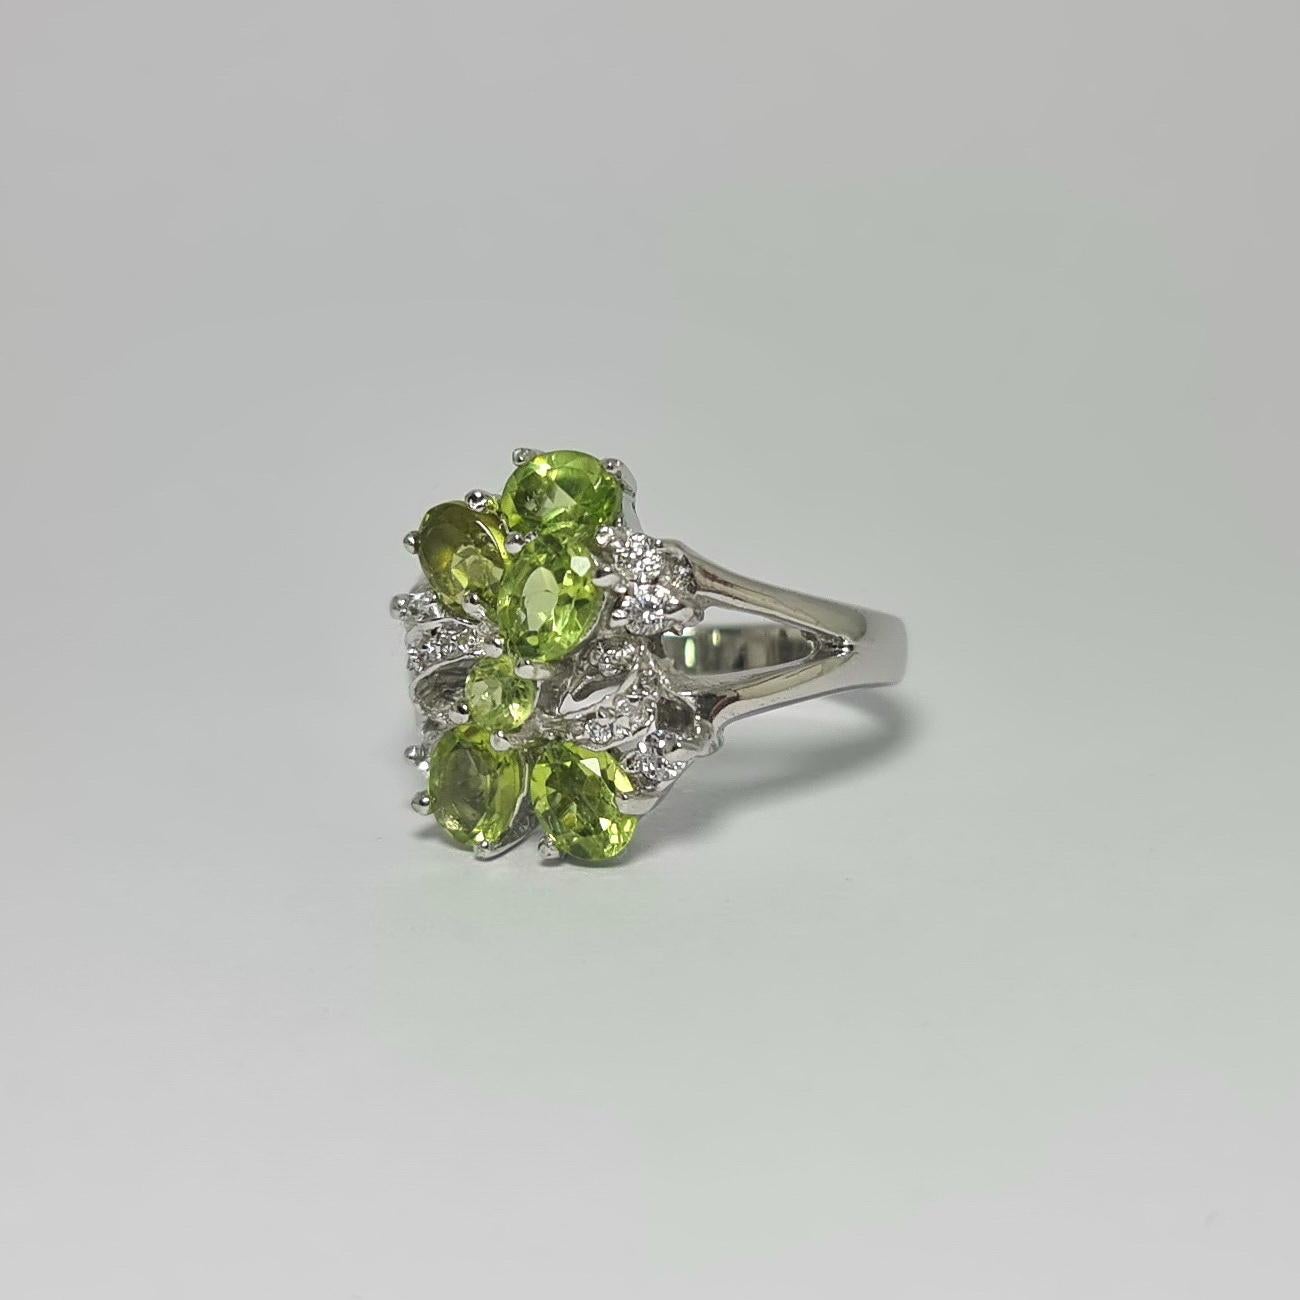 Natural Peridot with Cubic Zirconia  in .925  Pure Sterling Silver Rhodium Plated  Ring
Please see other listings for matching pieces 